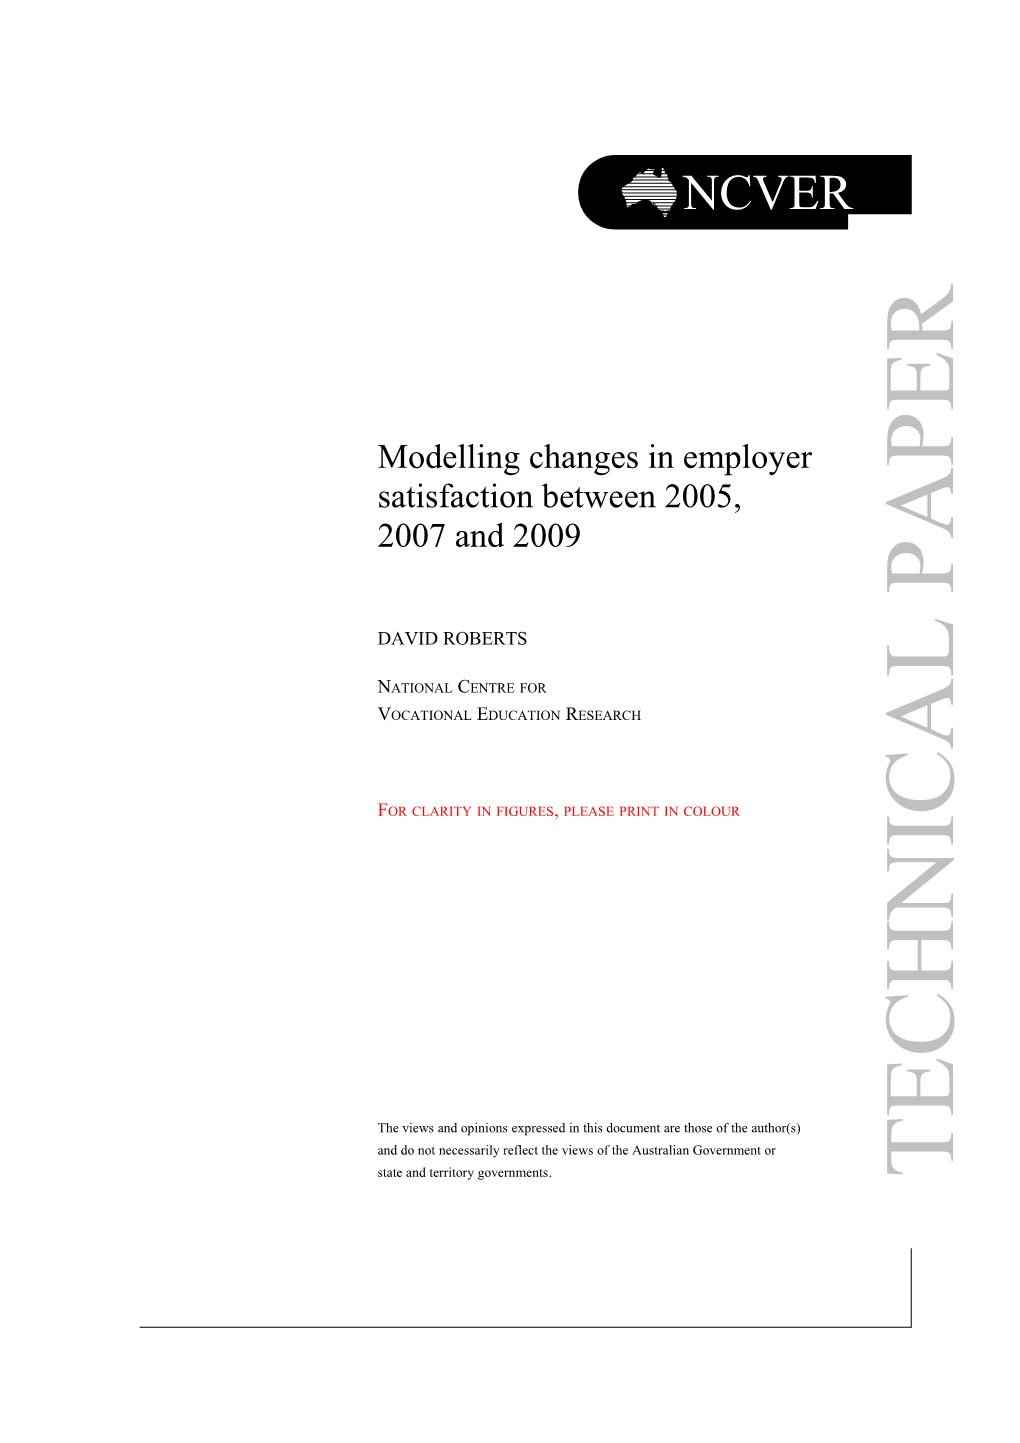 Employer Satisfication 2005 and 2007